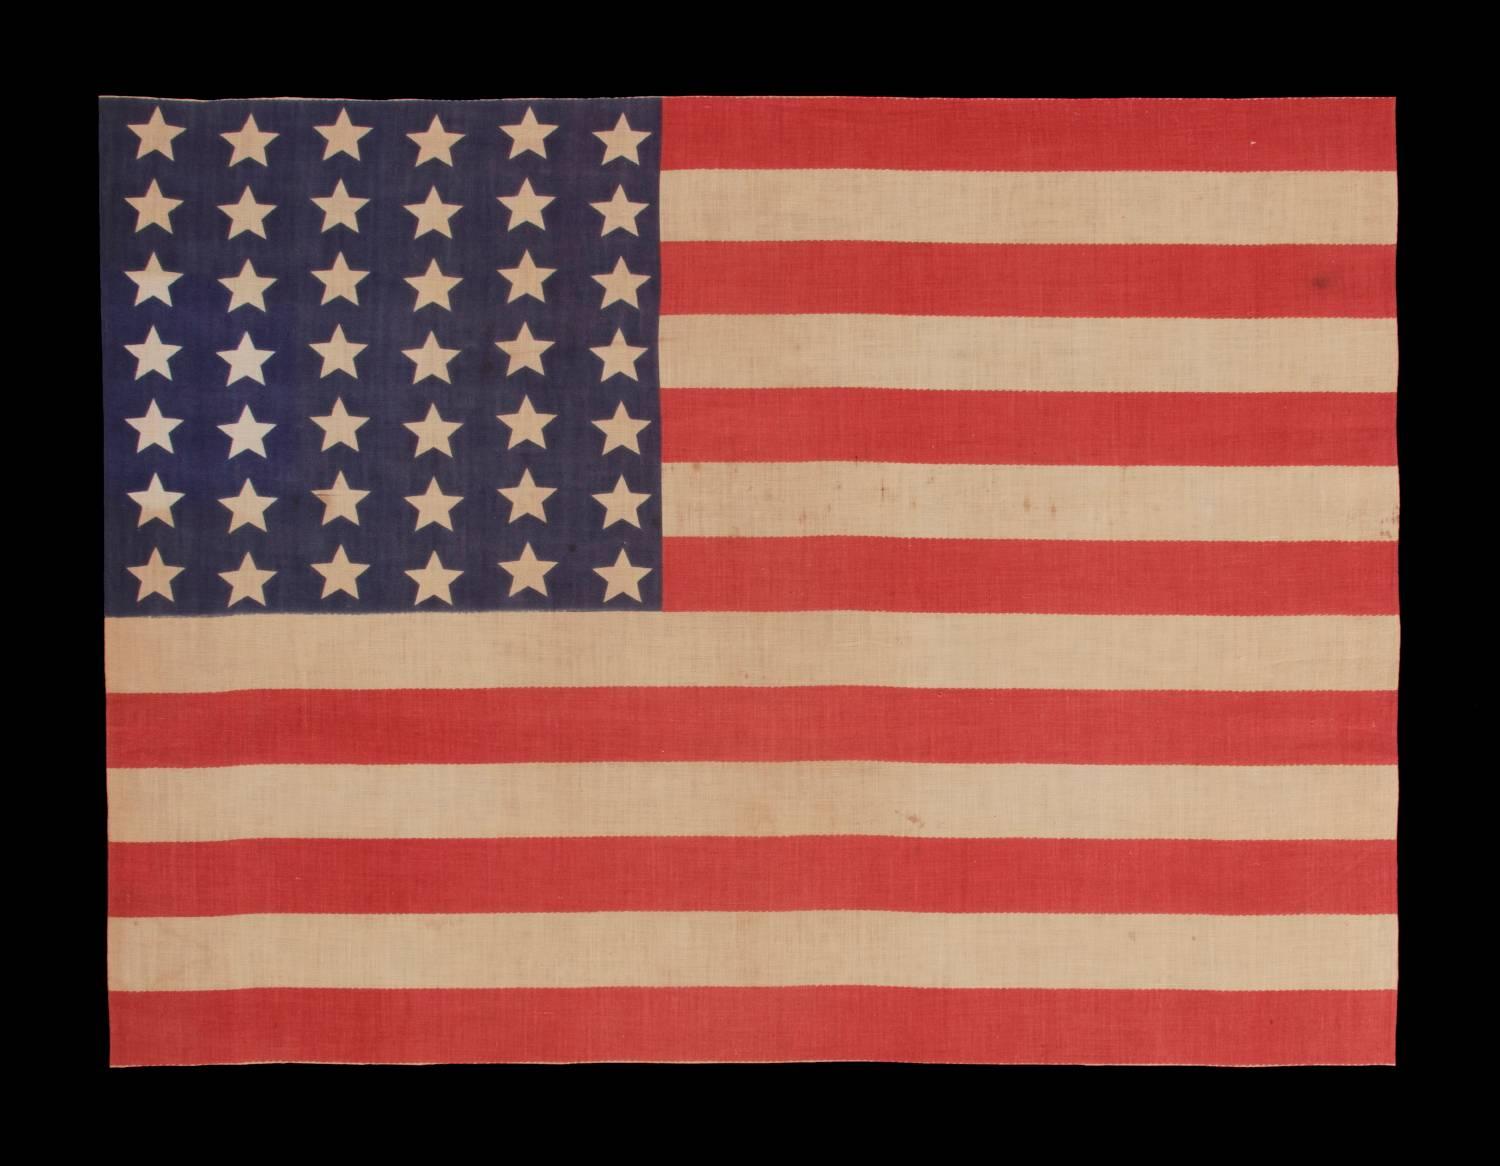 42 stars in a wave configuration of lineal columns, never an official star count, 1889-1890, Washington Statehood:

 42 star American parade flag, printed on cotton. This interesting star pattern is called a “wave” configuration. Note how the